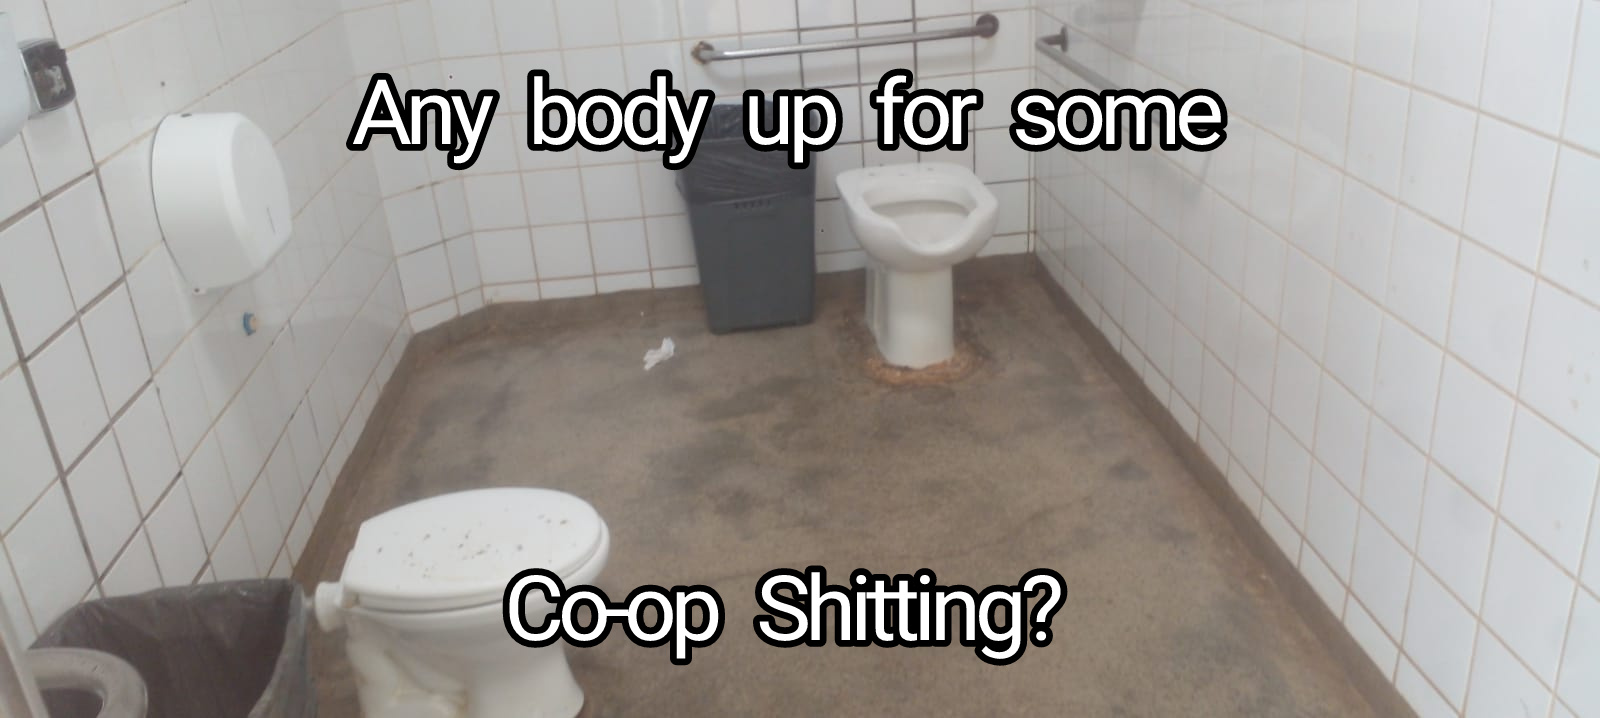 funny memes - tile - Any body up for some Coop Shitting?